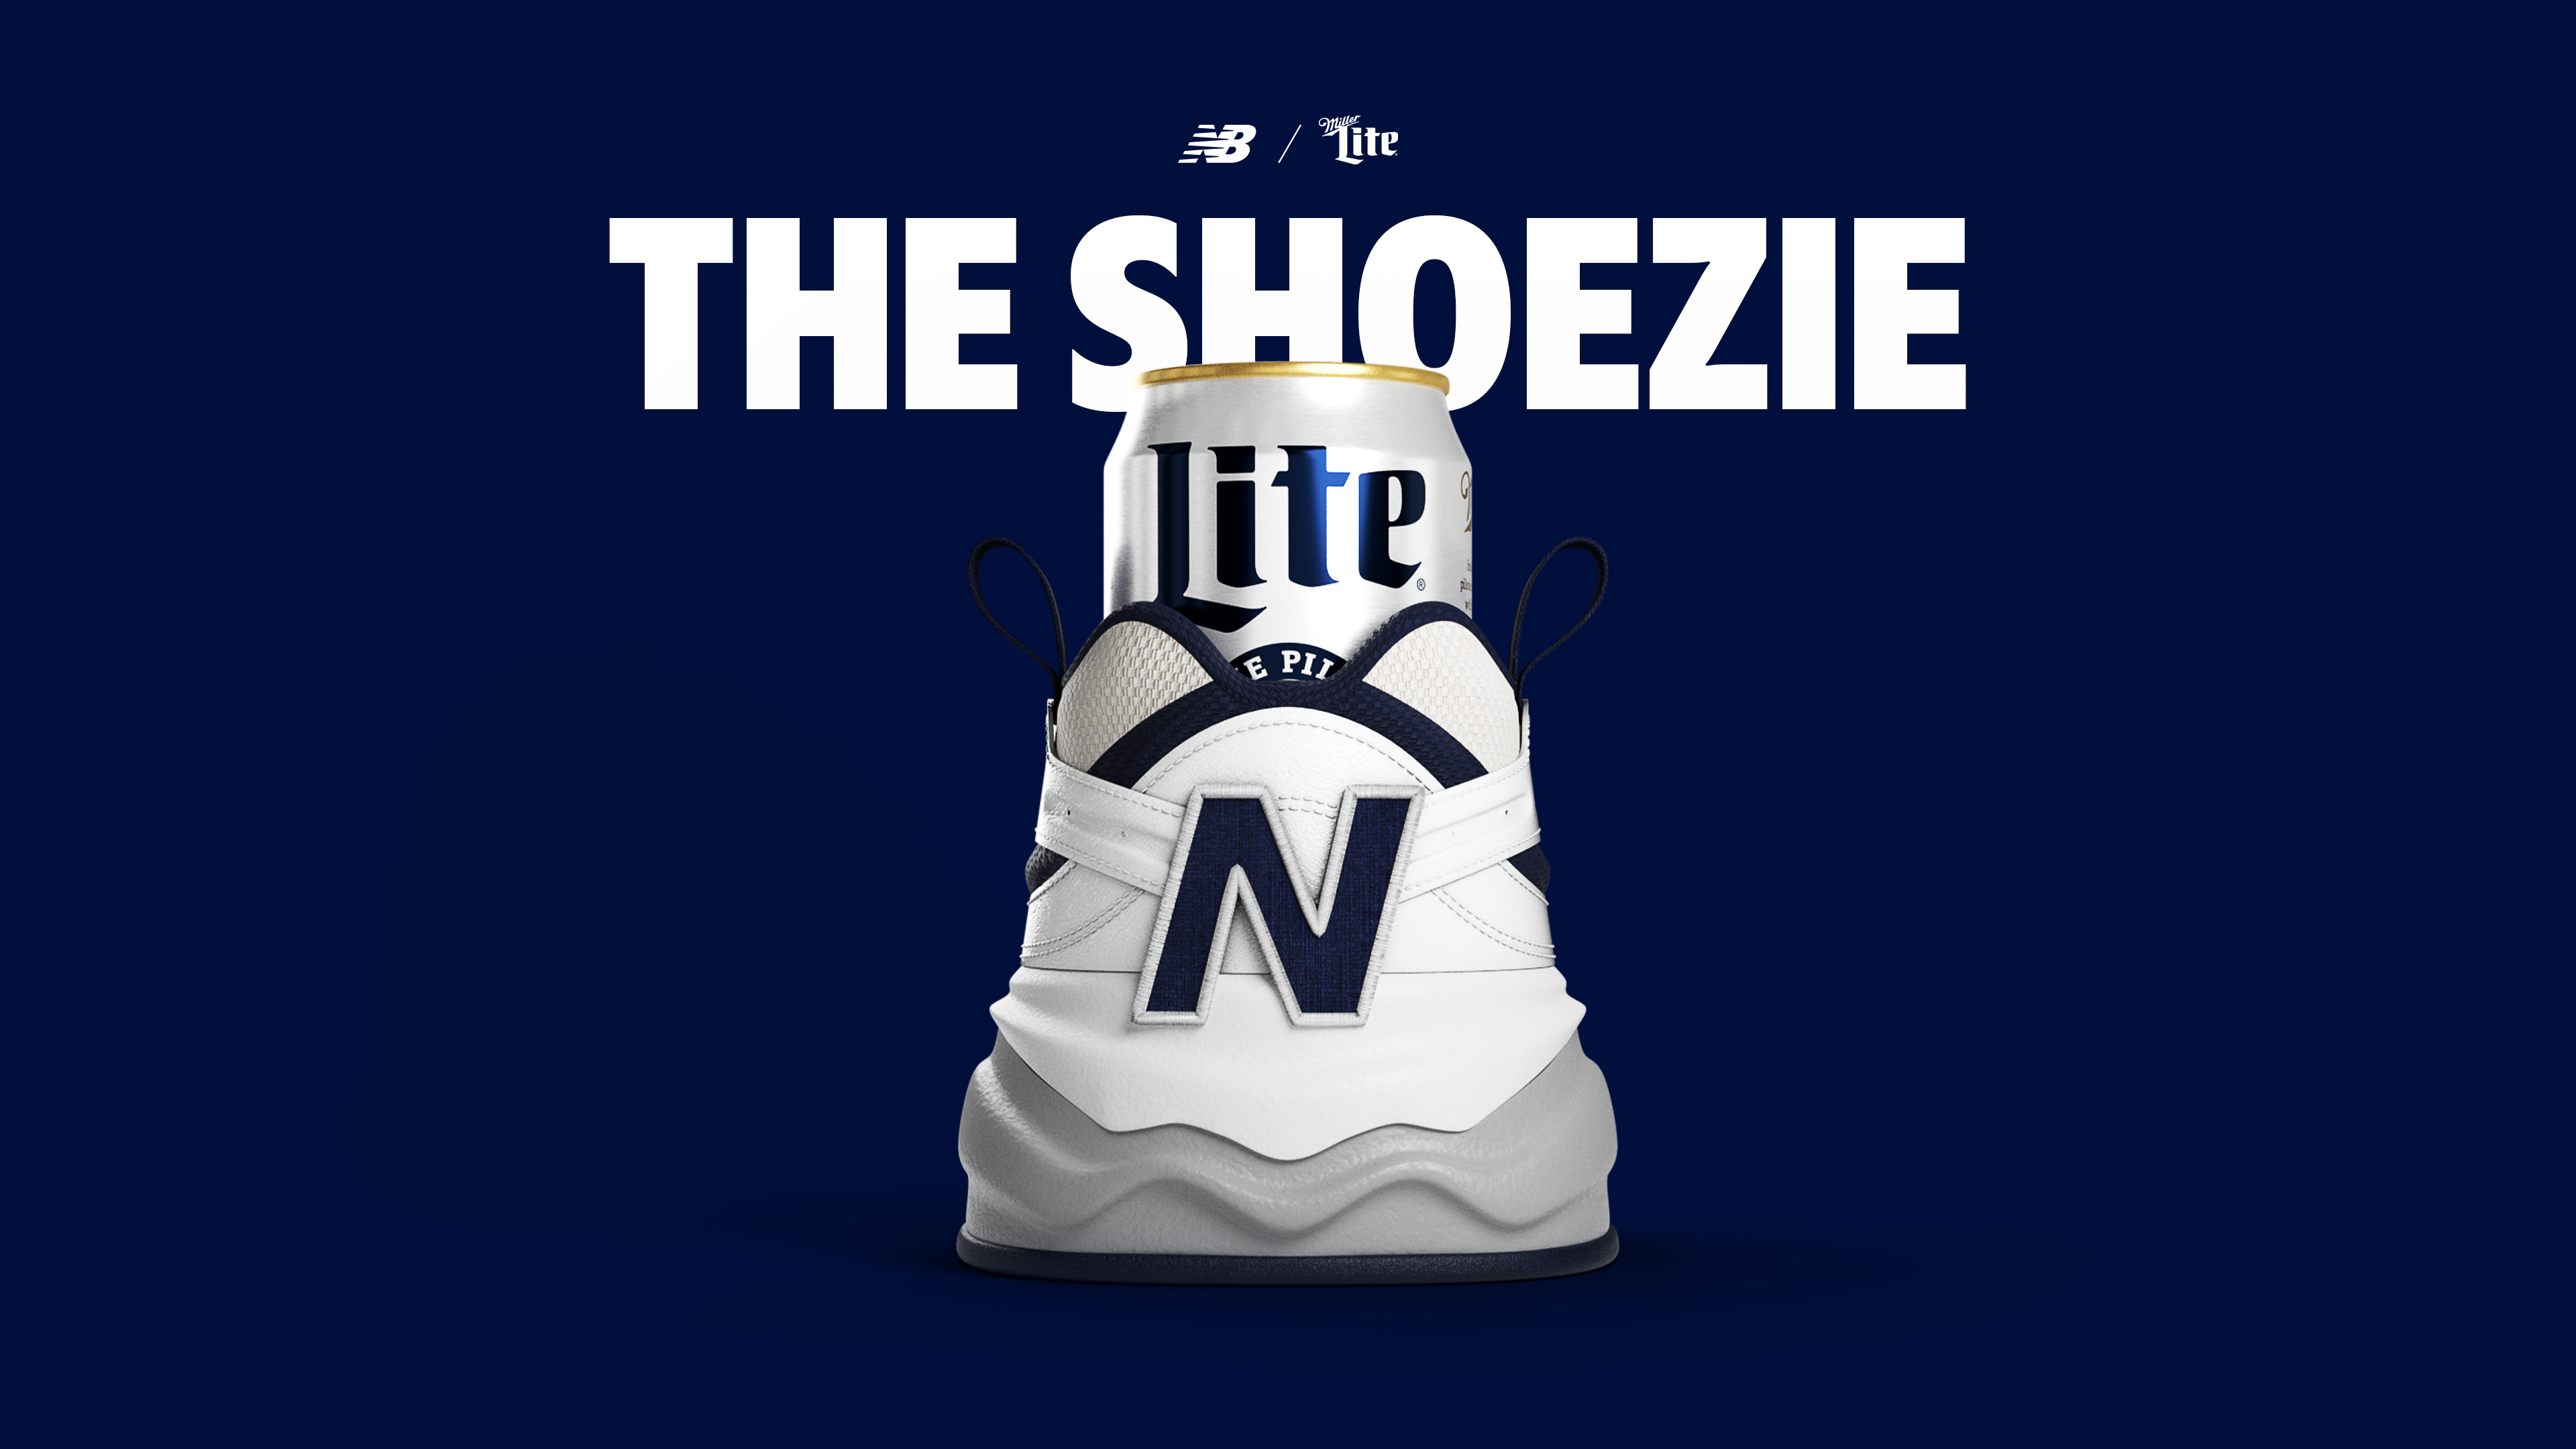 Contaminado Influyente parrilla Miller Lite partners with New Balance for novel Father's Day gift: The  'Shoezie' | Molson Coors Beer & Beyond